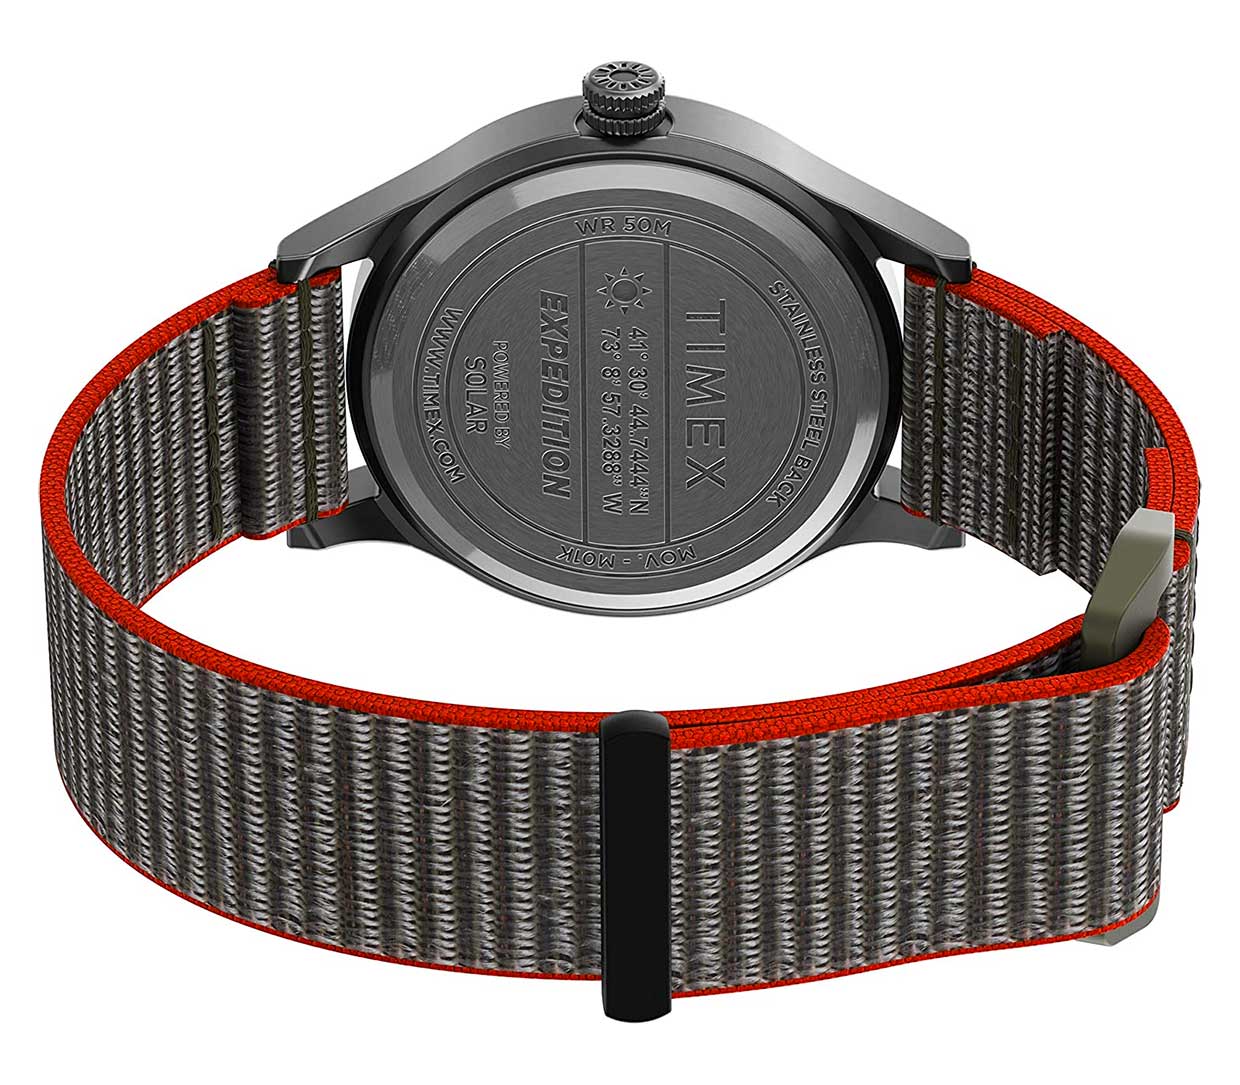 Timex Expedition Scout Solar